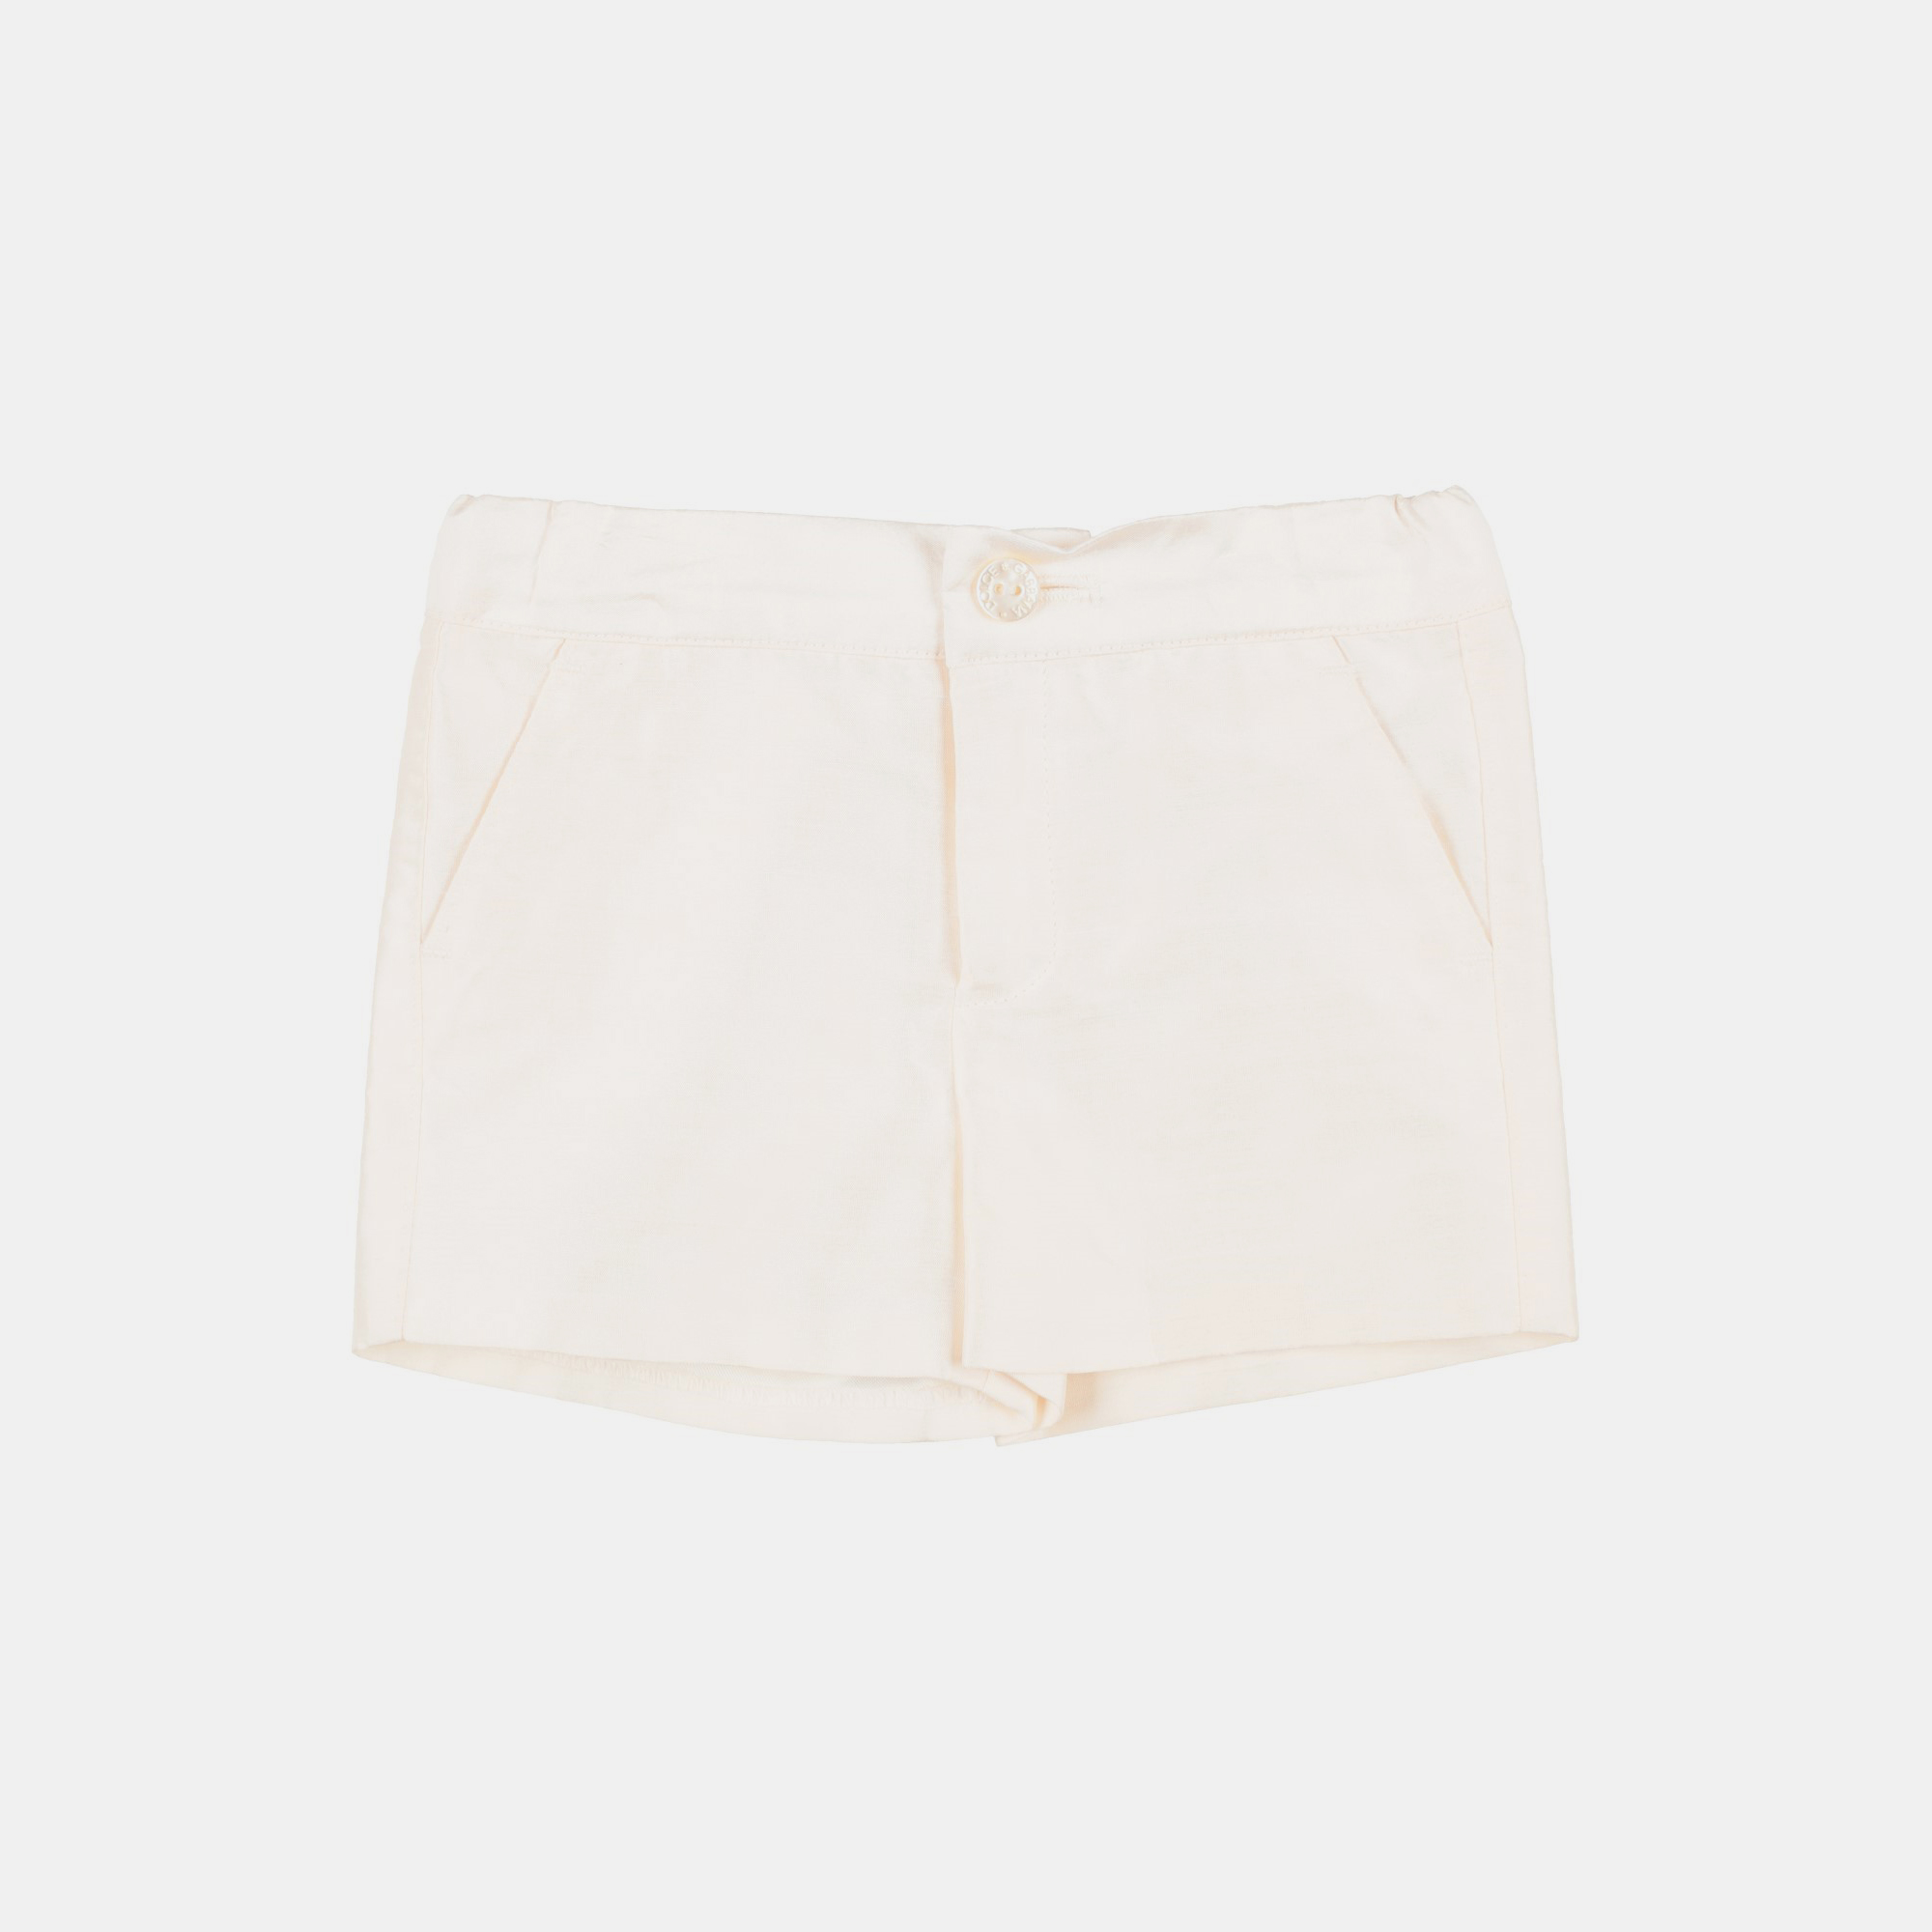 Elevate your childs style with these designer shorts meticulously crafted for both comfort and flair. Made from premium materials these trousers offer a luxurious feel while ensuring durability for every adventure.